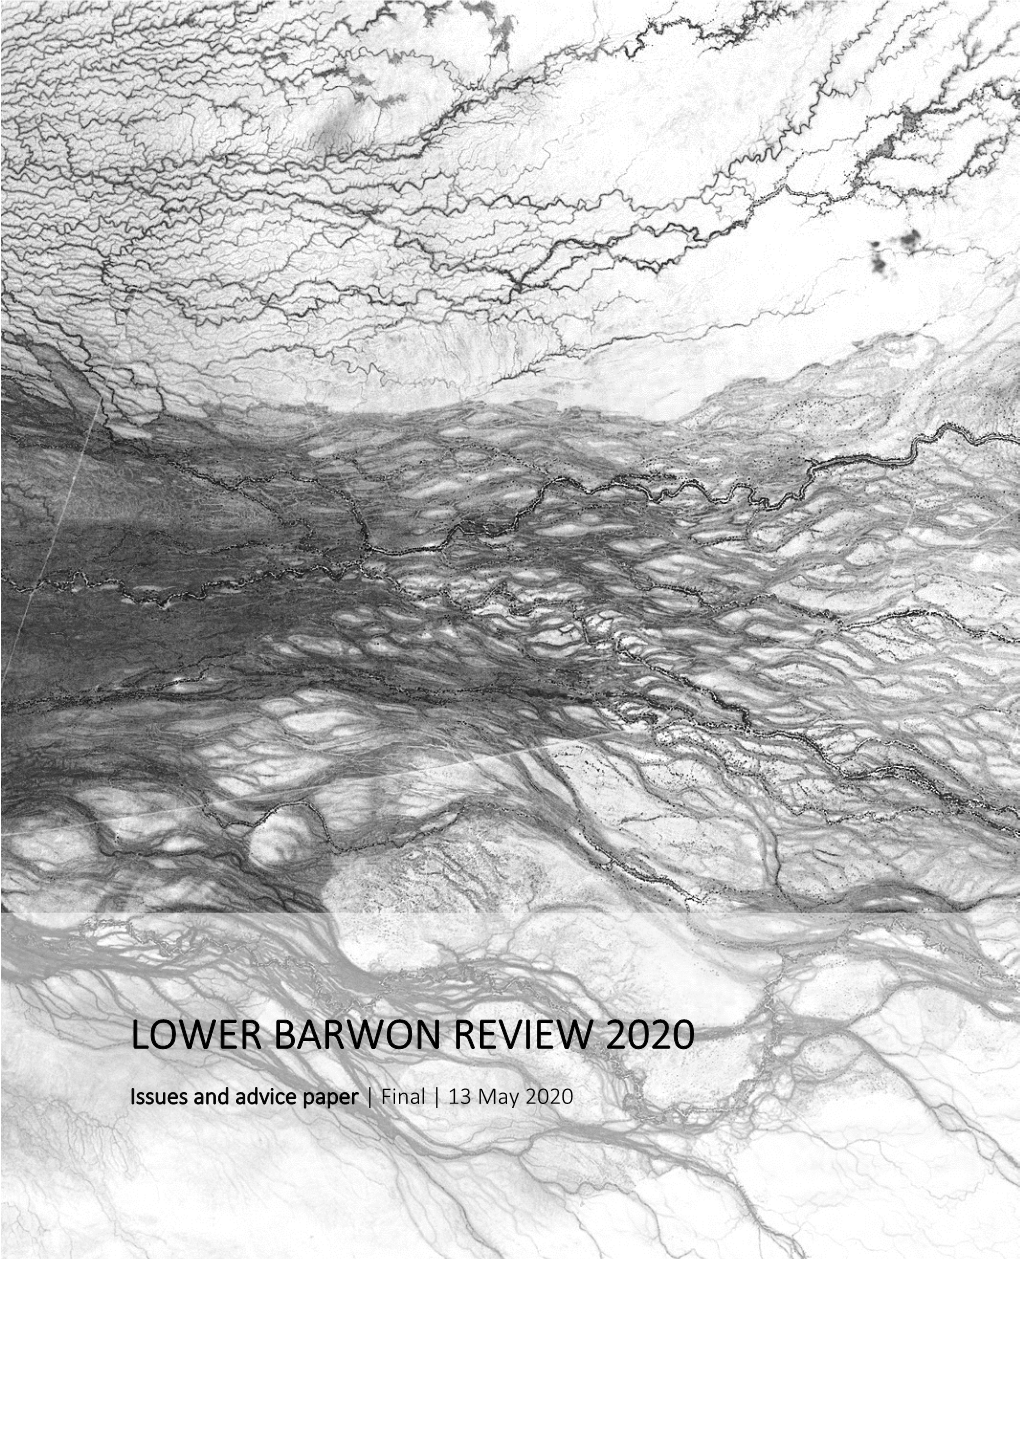 Lower Barwon Review 2020